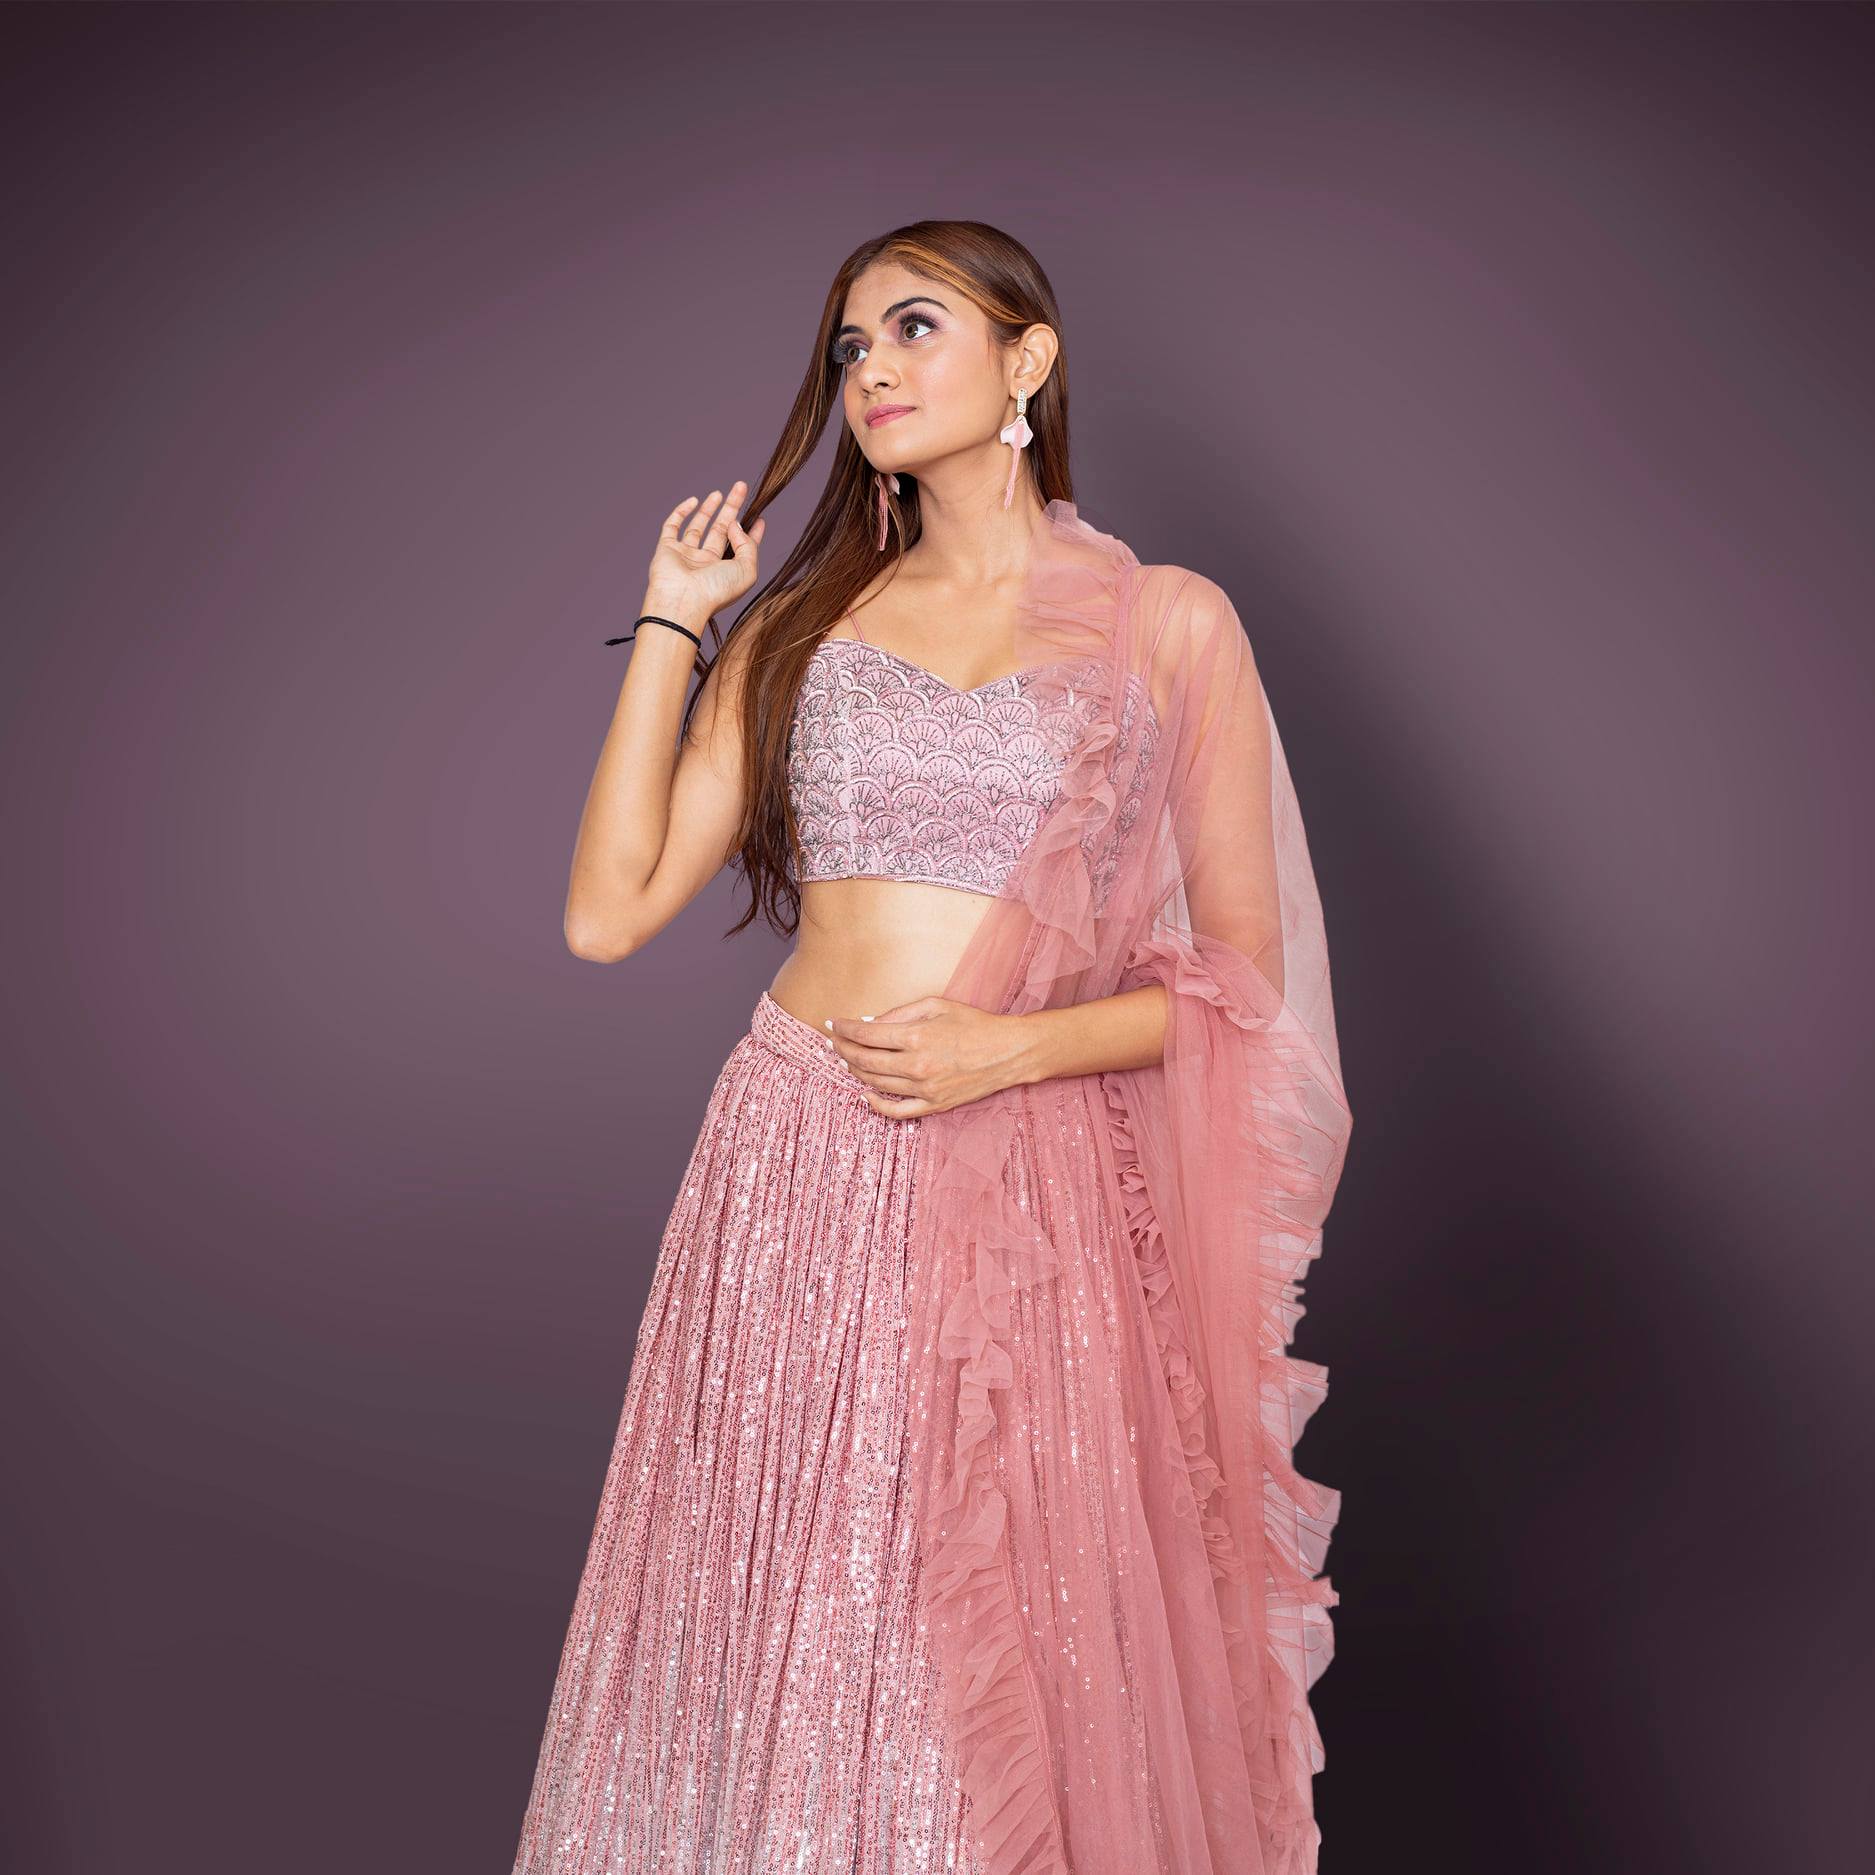 Pink and Silver Ombré Lehenga Bollywood | dubizzle